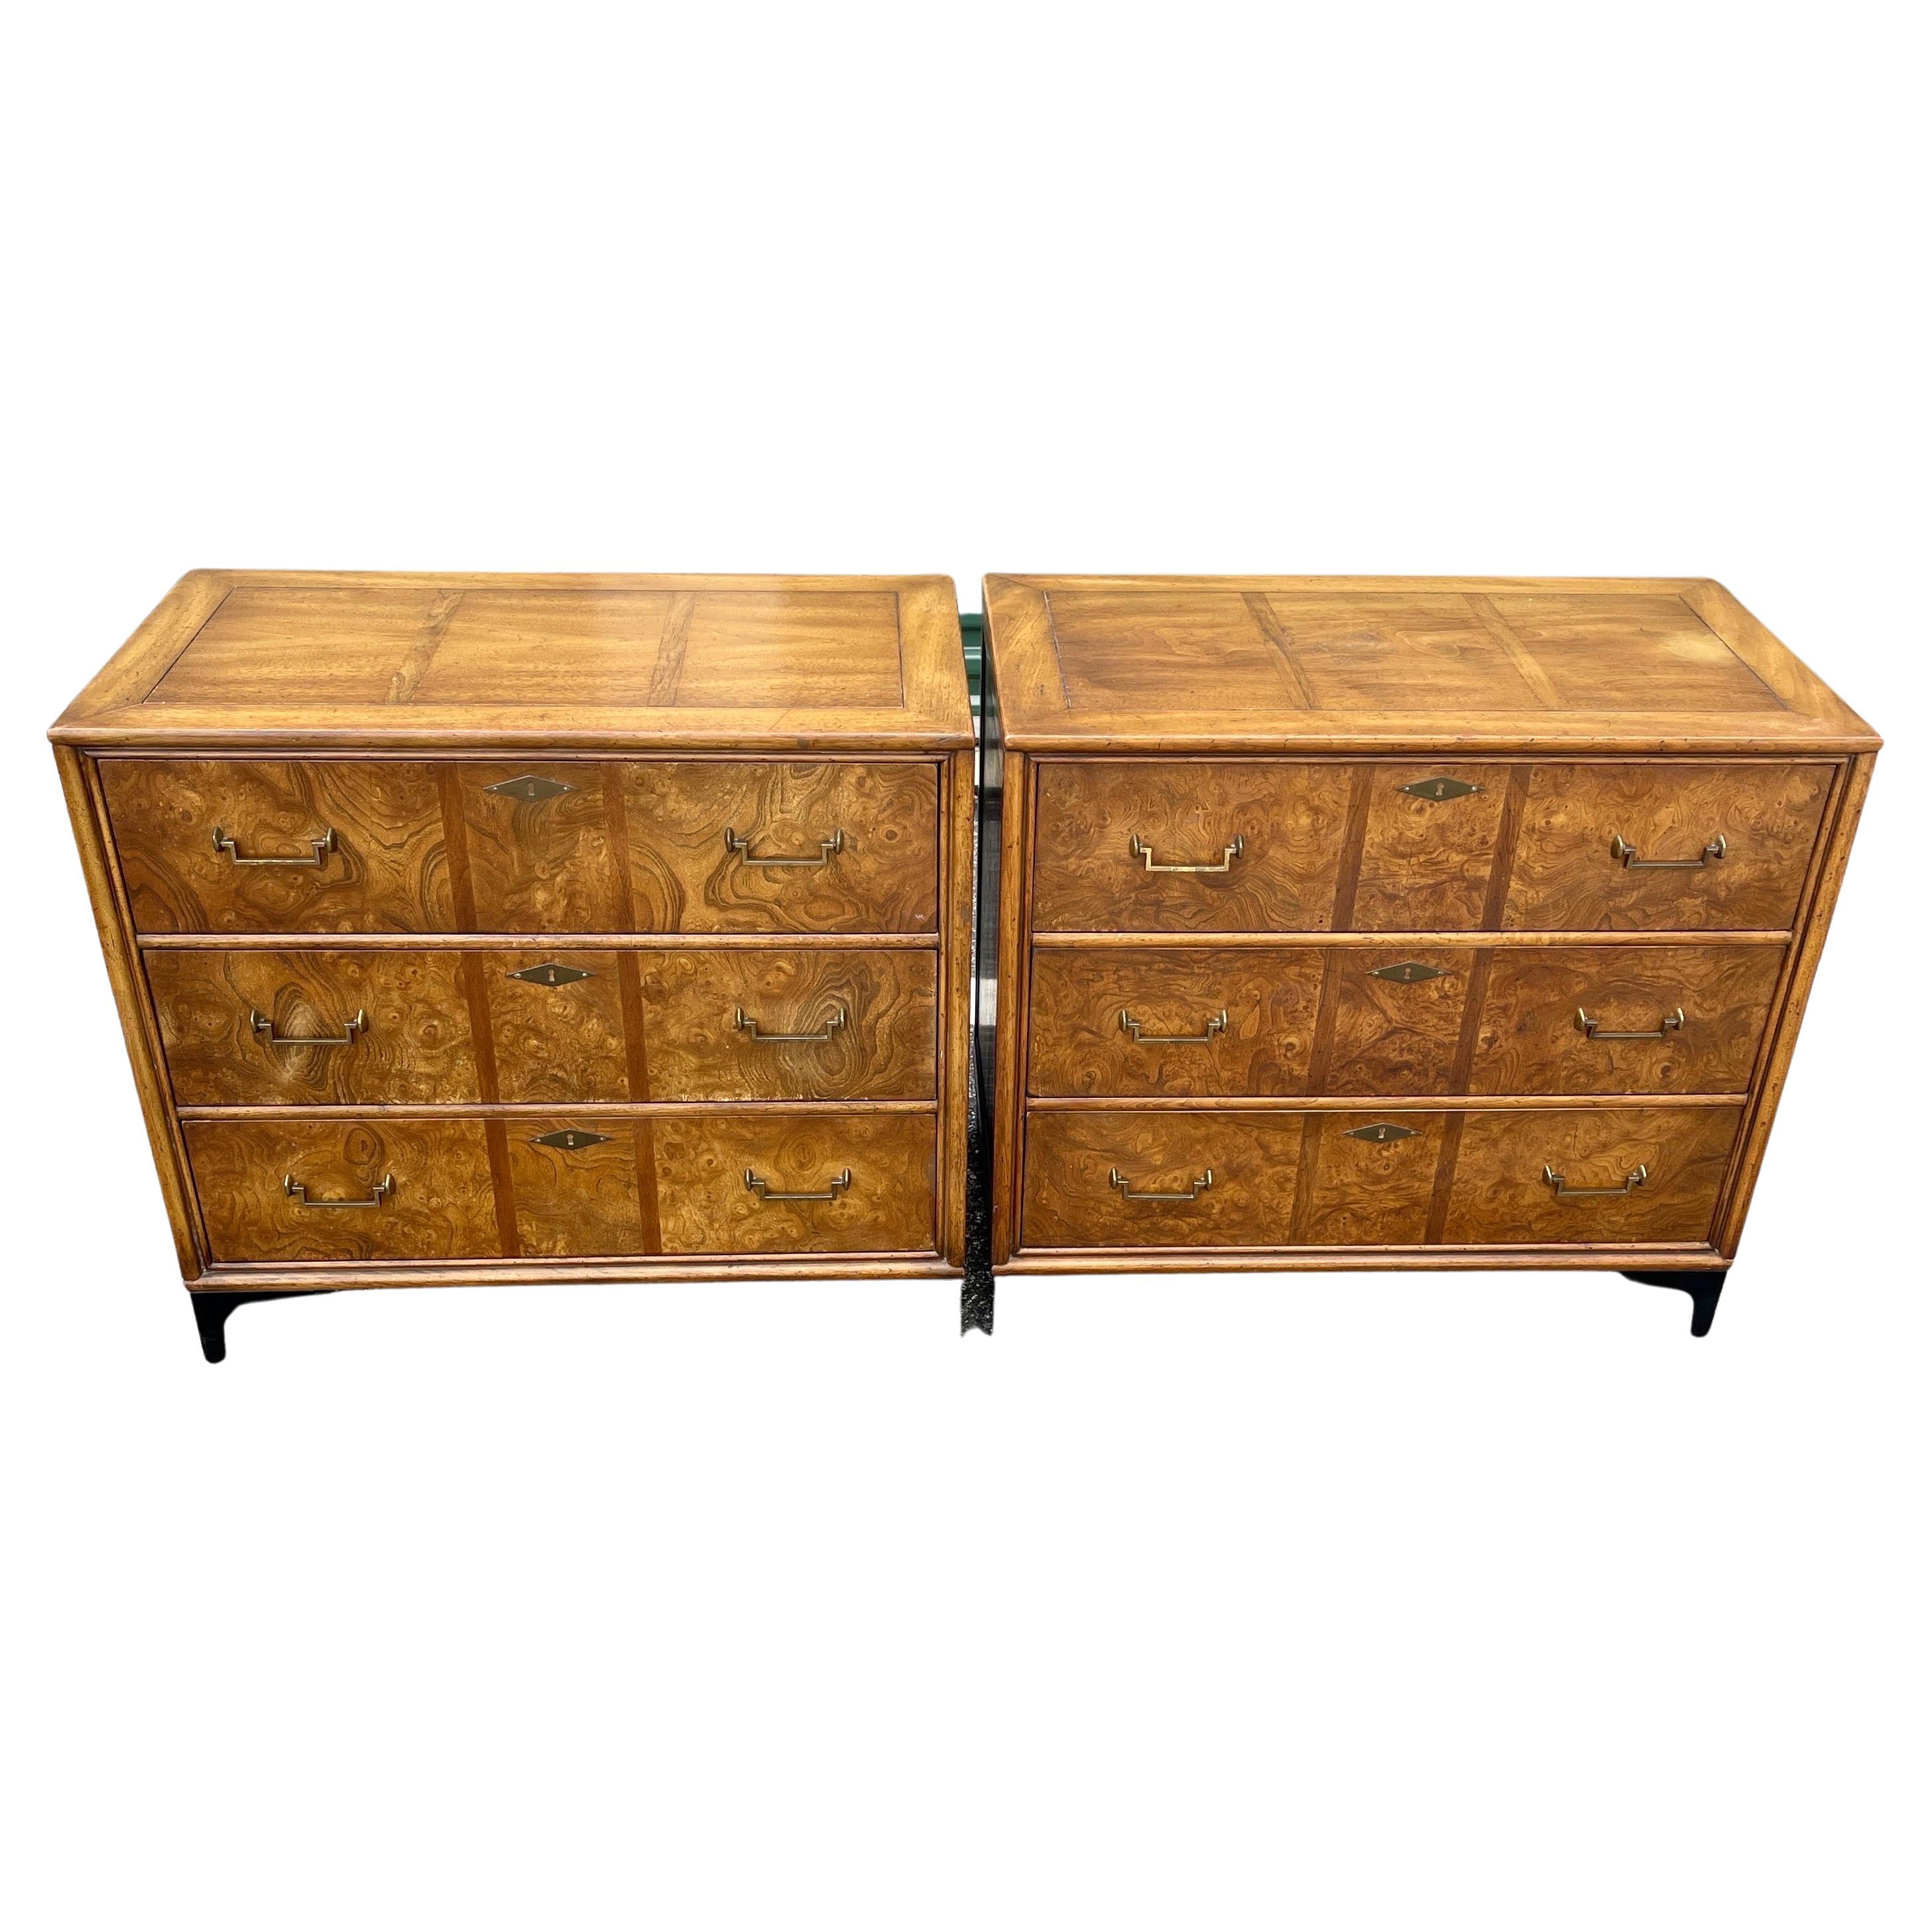 American Pair of Mid-Century Mastercraft Chests of drawers, dressers or Night Stands with the original brass hardware.
The drawers are in good easy to used working condition with no smells or disfunction. Tops has age-appropriate wear as seen on